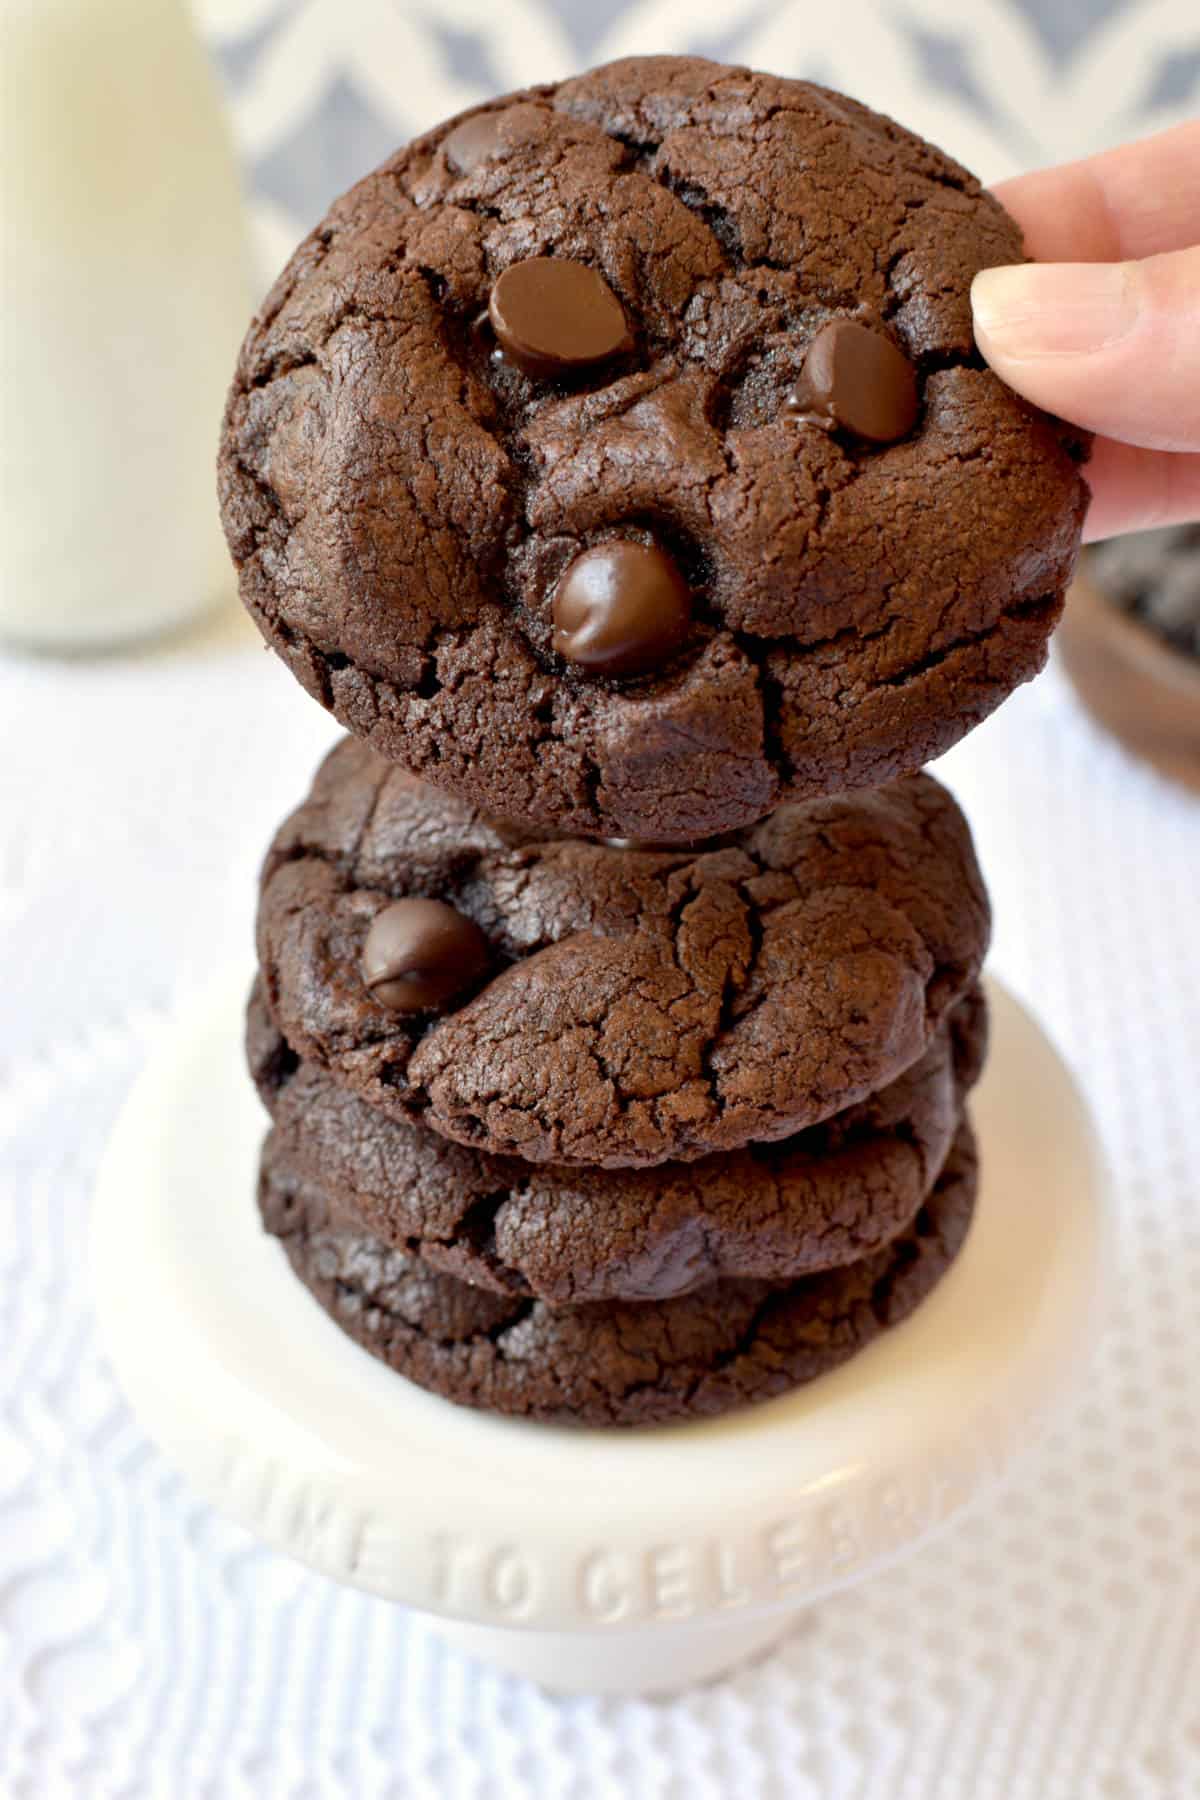 chocolate chocolate chips cookies with a hand holding one.